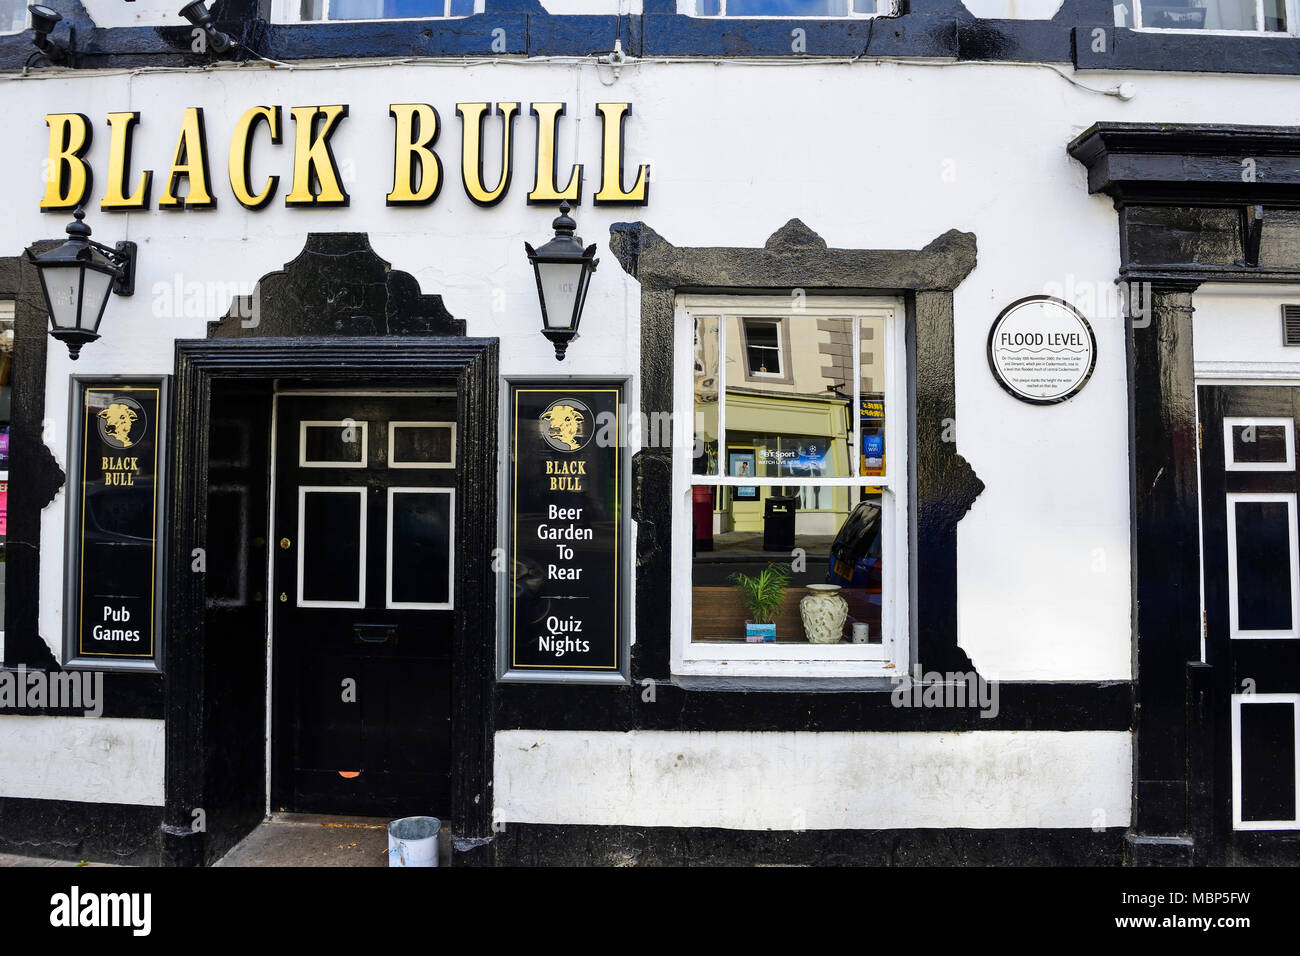 Black Bull public house with wall plaque recording the flood level during the 2009 floods in Cockermouth in the Lake District, Cumbria, England Stock Photo